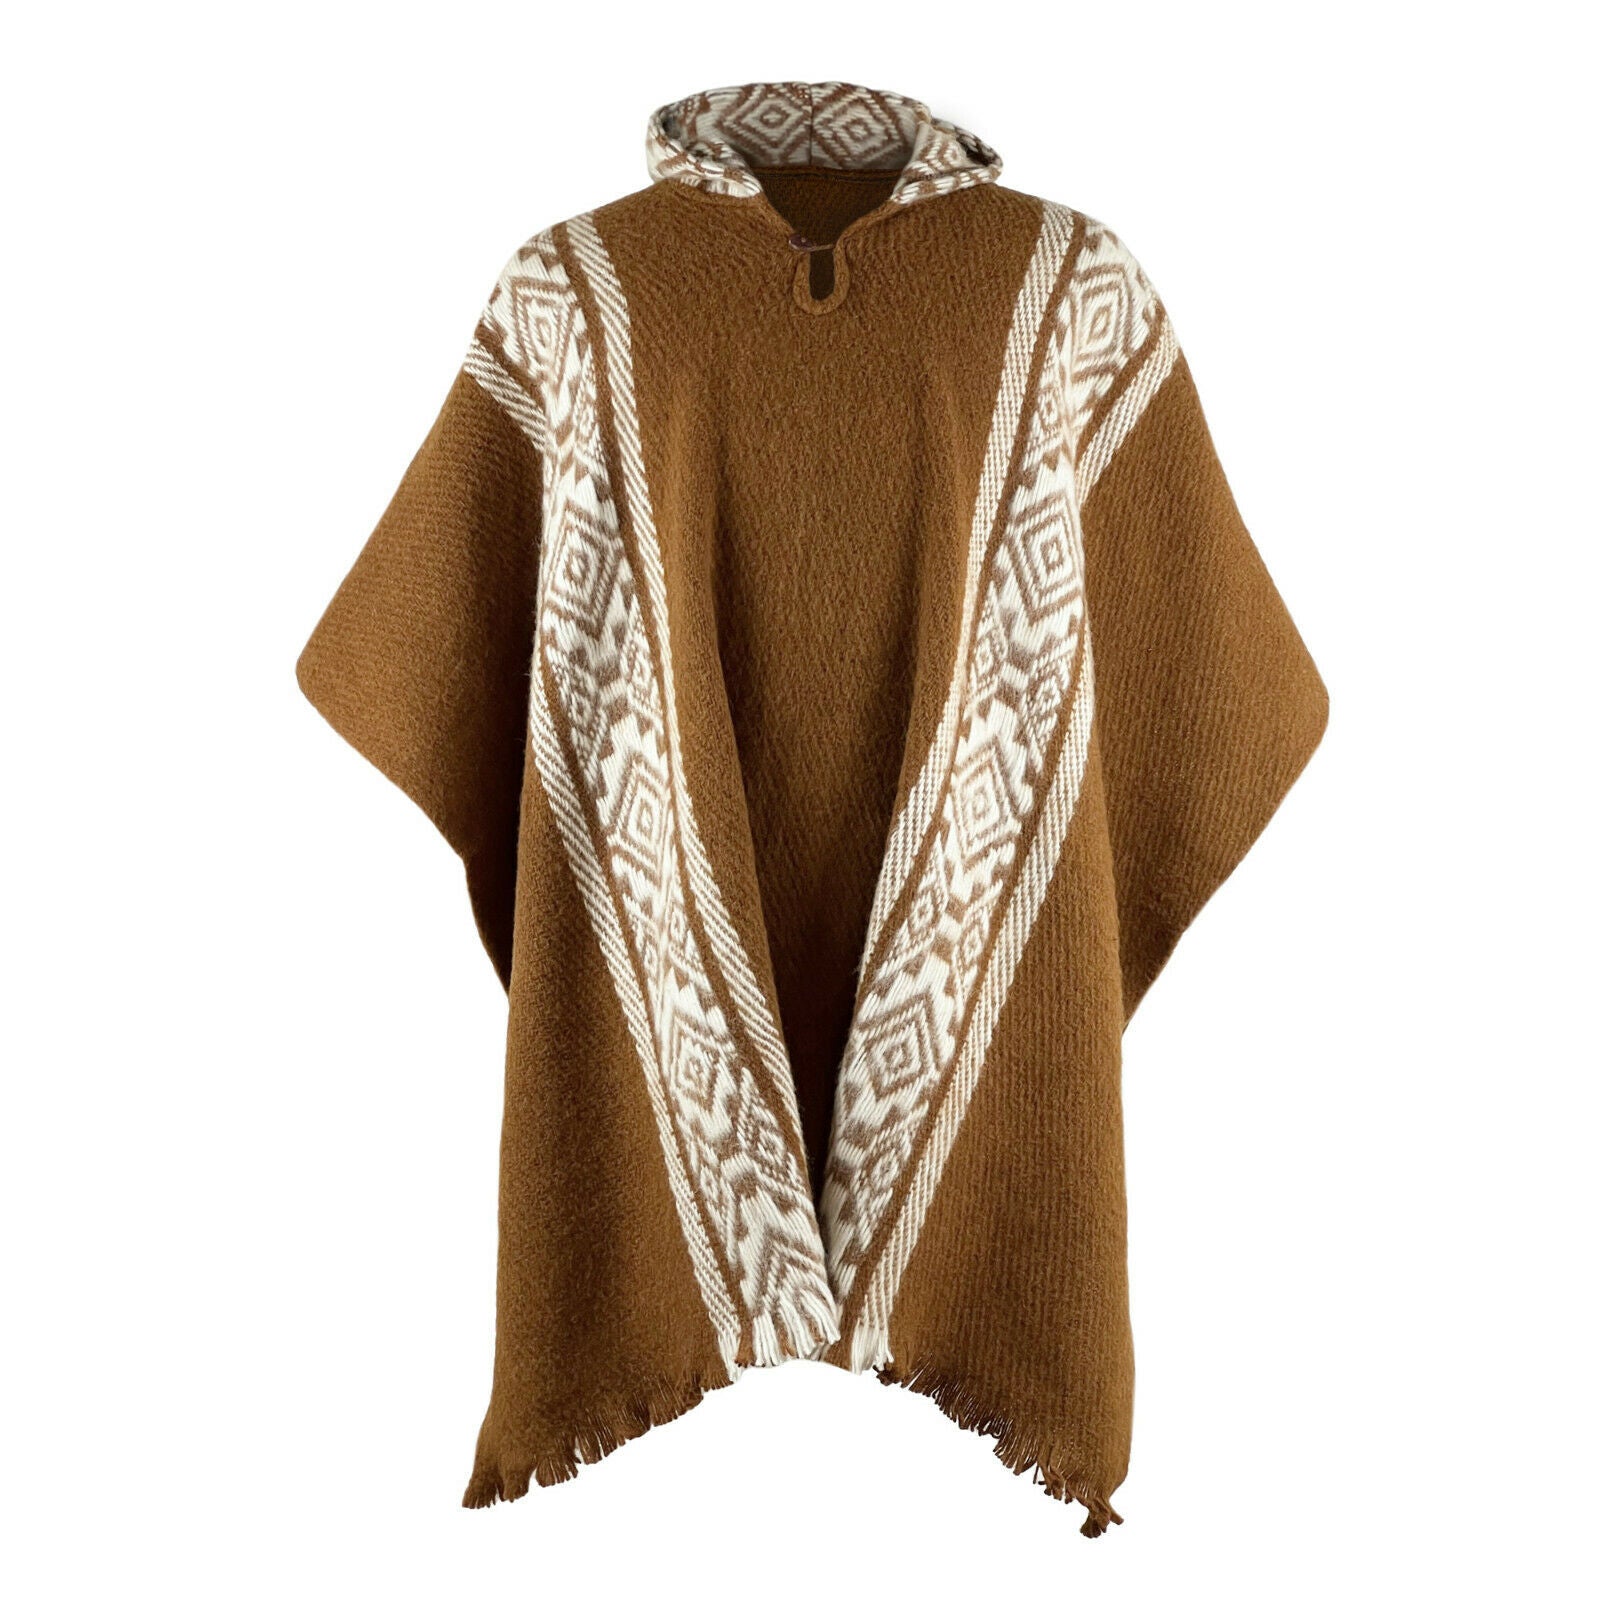 Kunki - Llama Wool Unisex South American Handwoven Hooded Poncho - brown with diamonds pattern